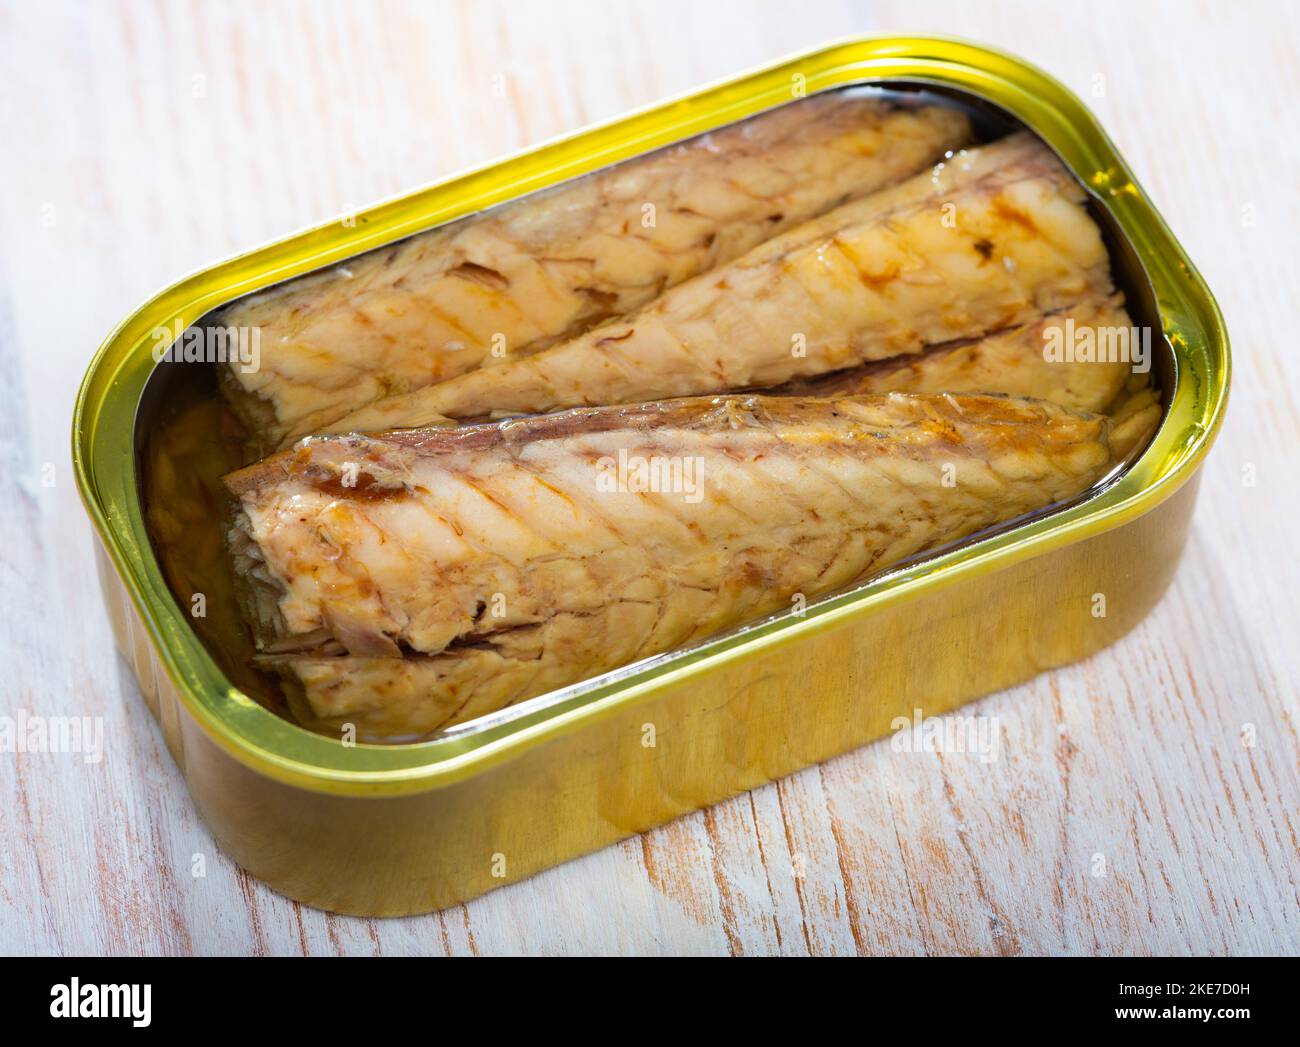 Deliciously tinned sprats fillet of mackerel in sunflower oil Stock Photo